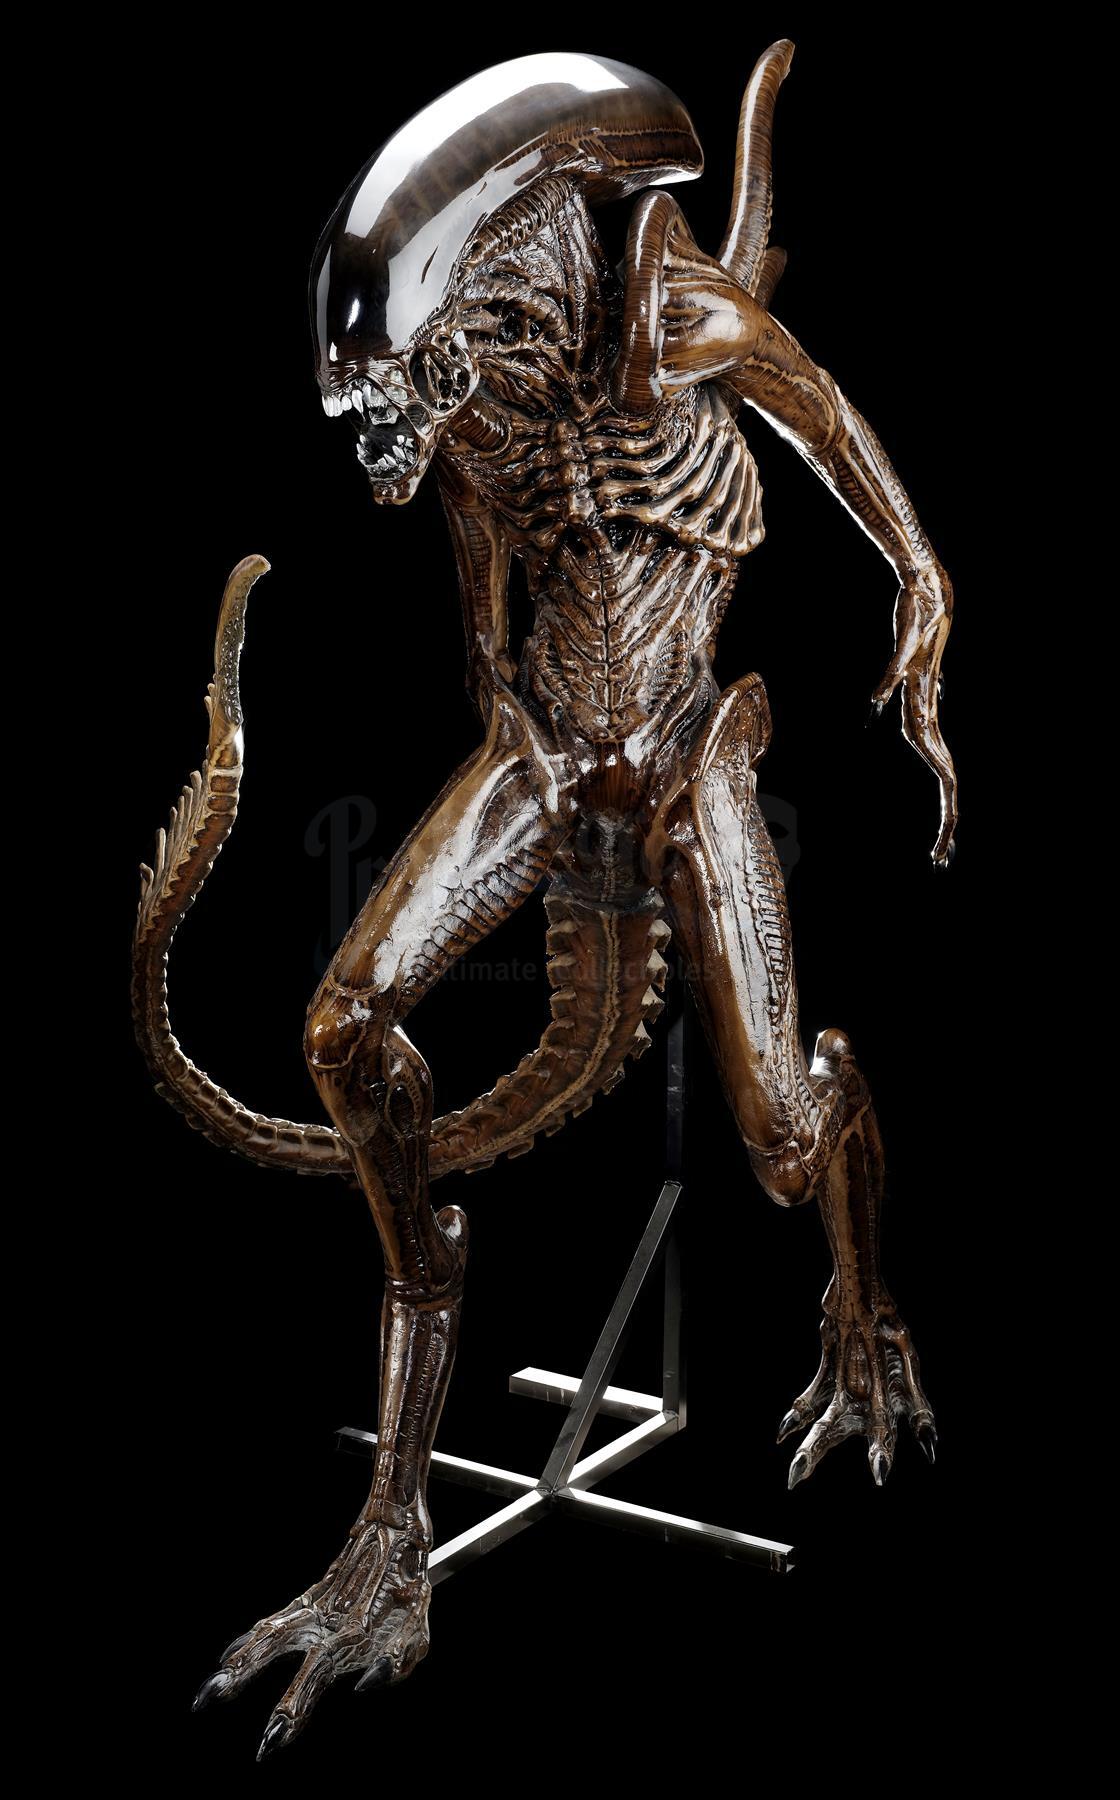 Lot #41 - ALIEN: RESURRECTION (1997) - Xenomorph Alien Display with Tail - Image 3 of 3